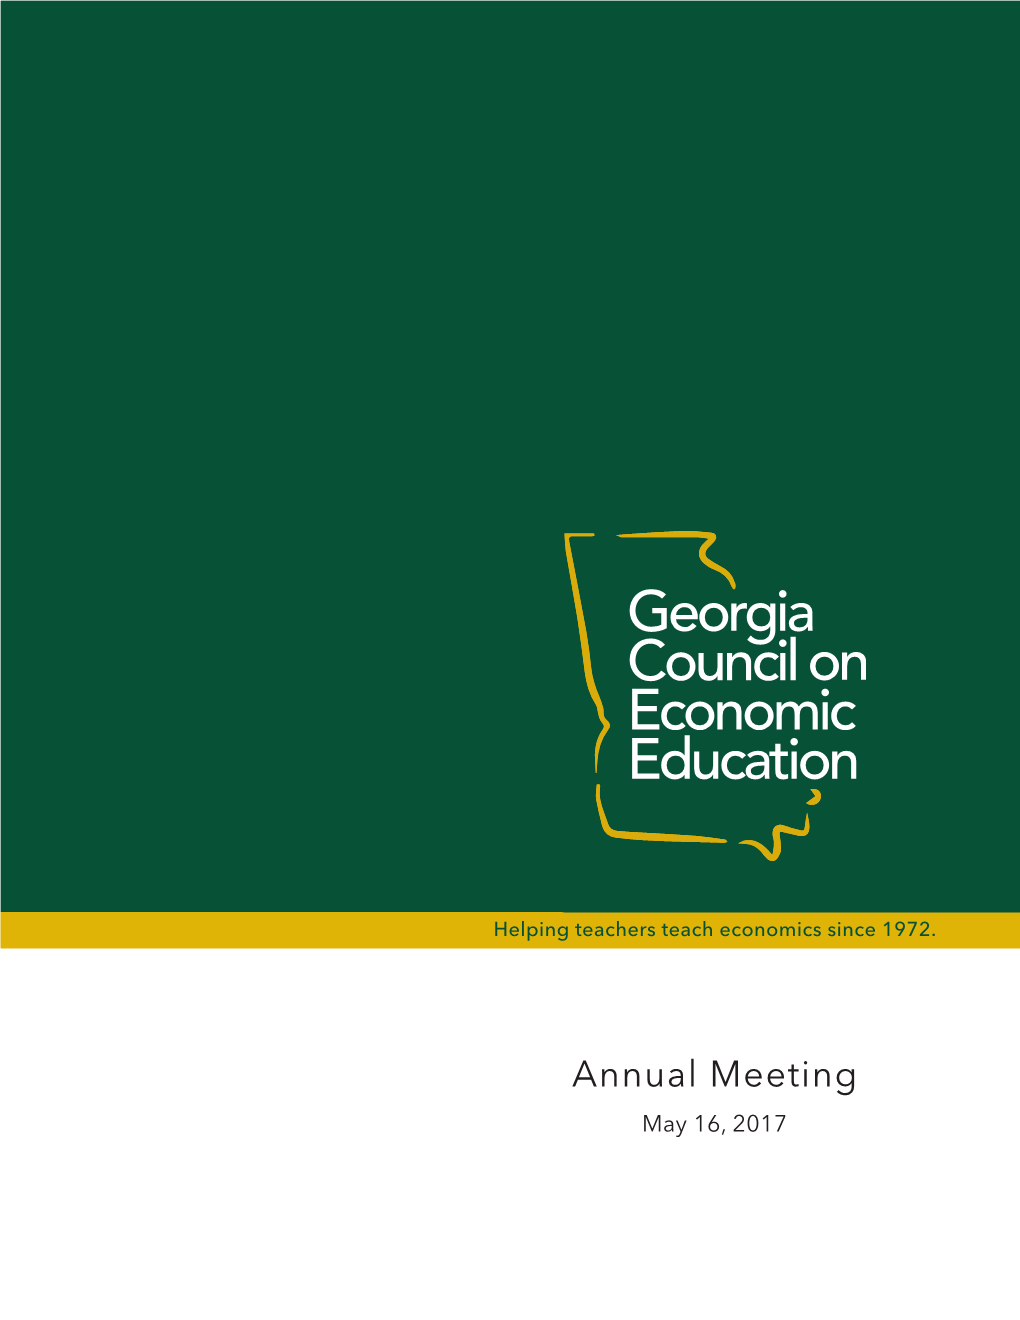 Annual Meeting May 16, 2017 the Vision of the Georgia Council On